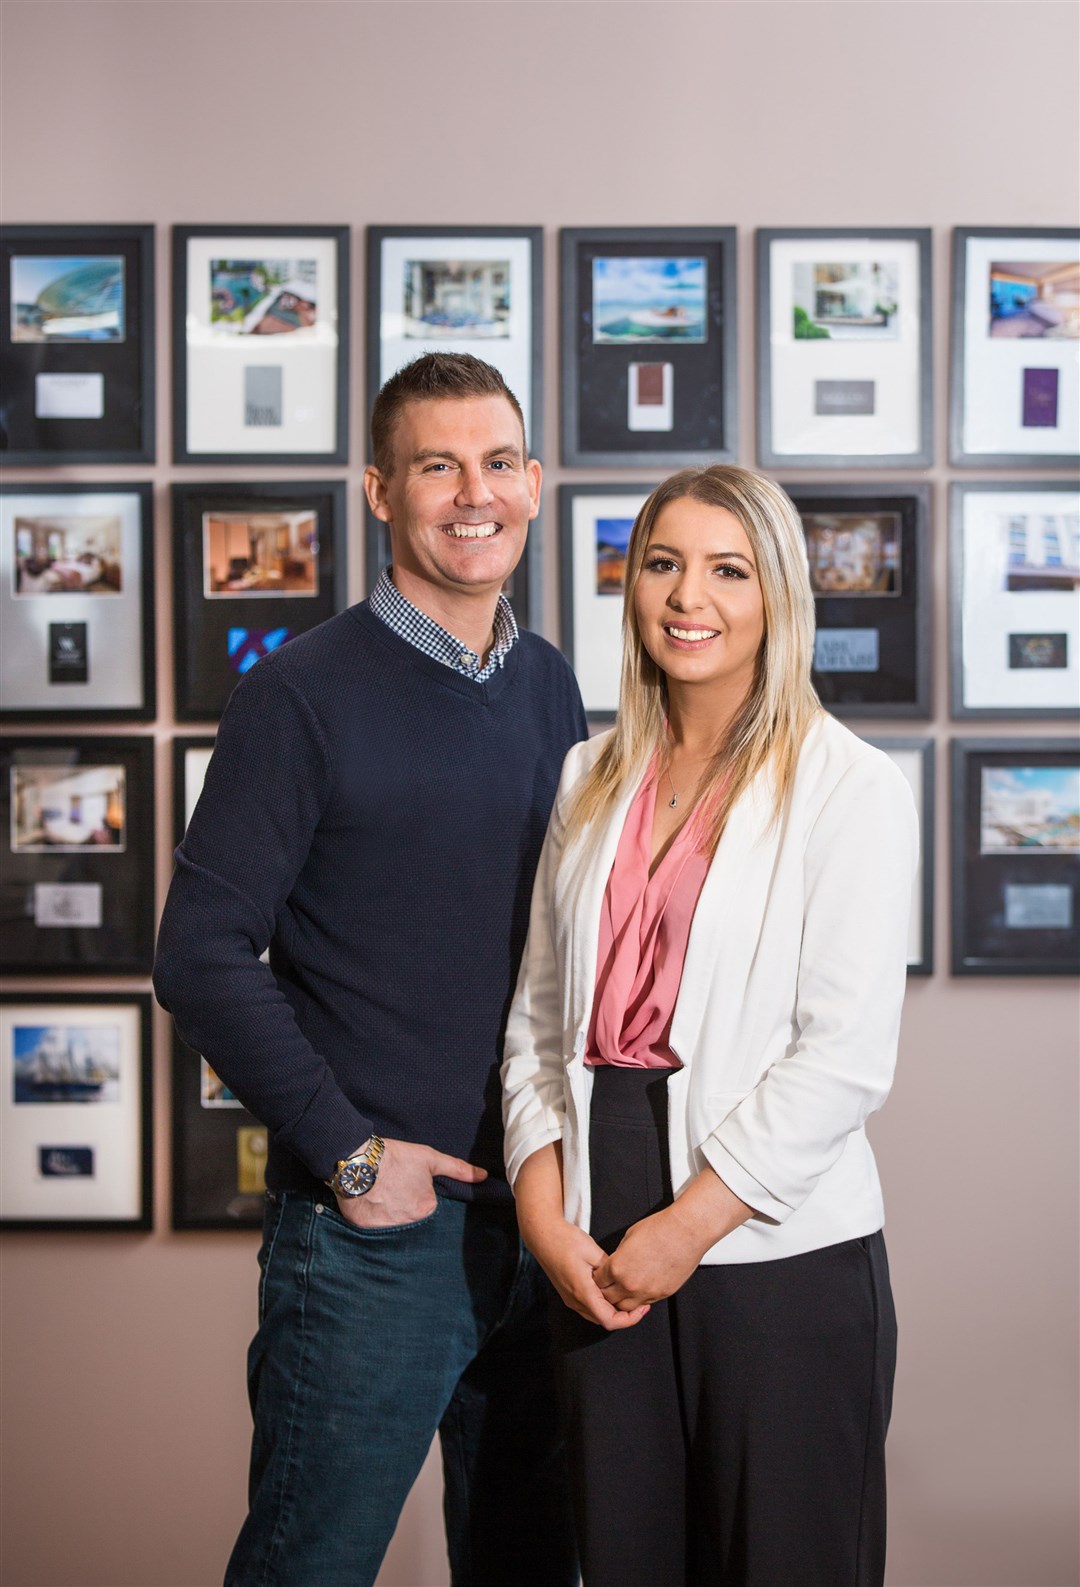 Inverness Travel owners Scott and Sarah Murray.